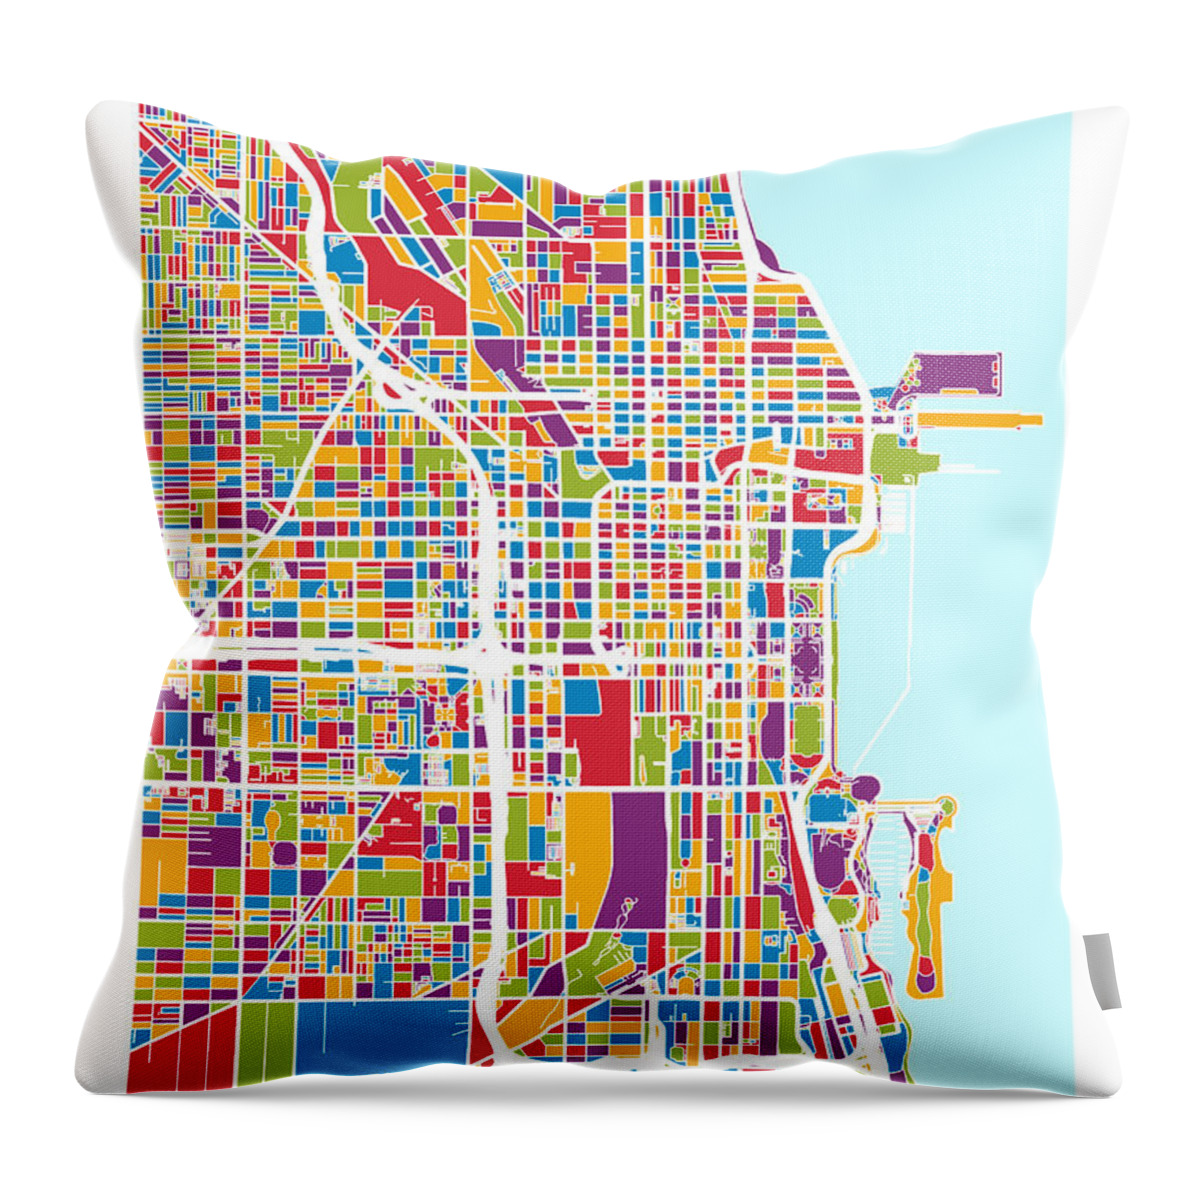 Chicago Throw Pillow featuring the digital art Chicago City Street Map by Michael Tompsett